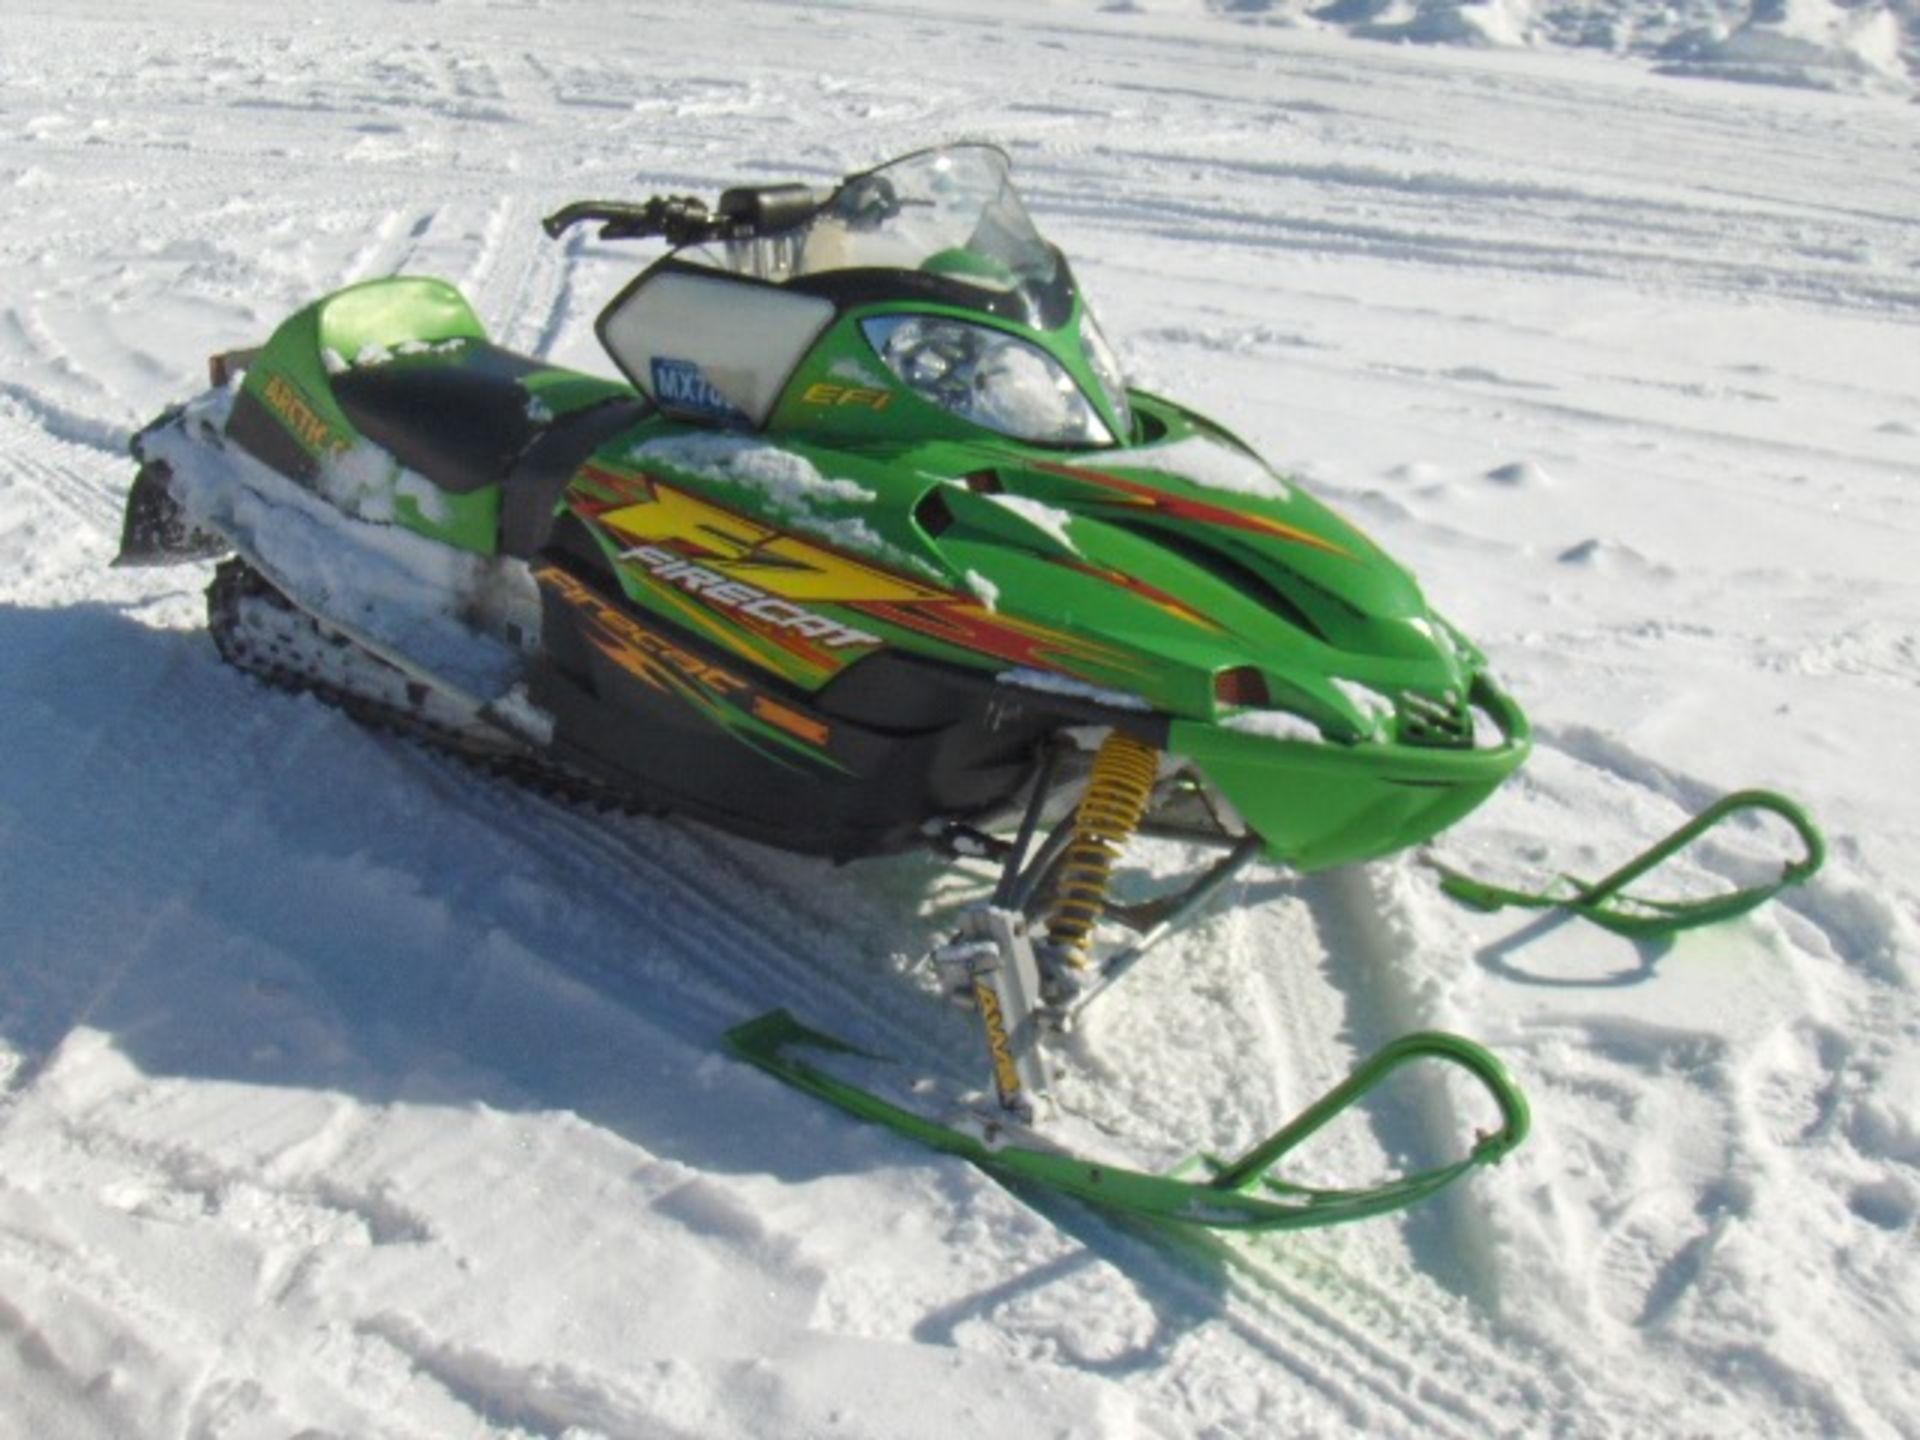 2004 ARCTIC CAT 700 F7  4UM04SNW54T138966 snowmobile, owner started at time of auction check in, - Image 2 of 4